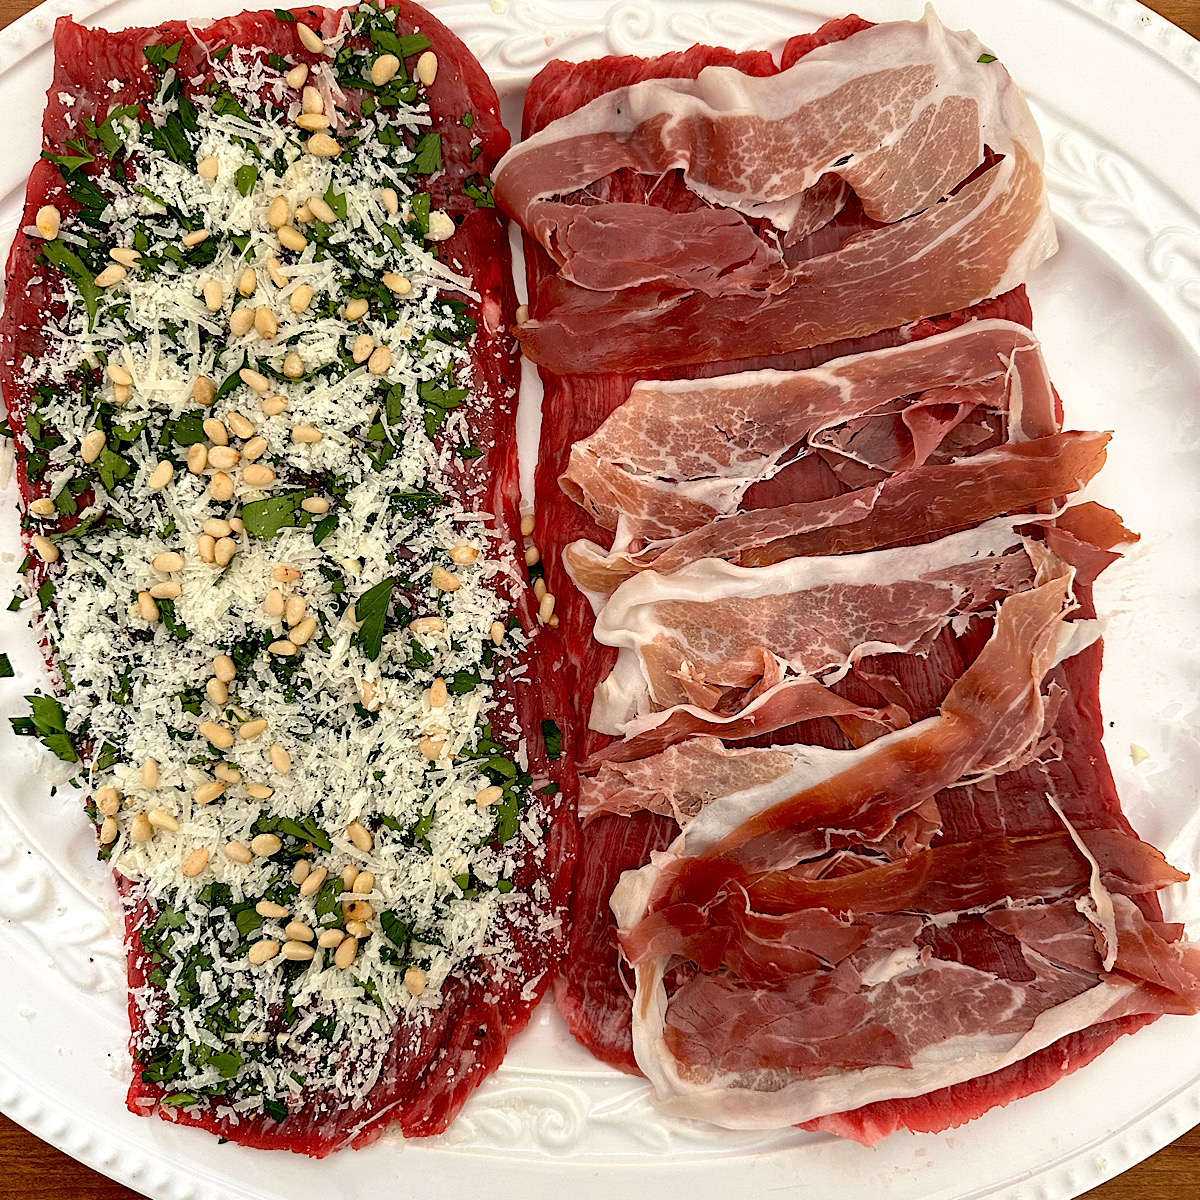 2 flank steaks, one with prosciutto layer and one with parsley-cheese-pine nut layer